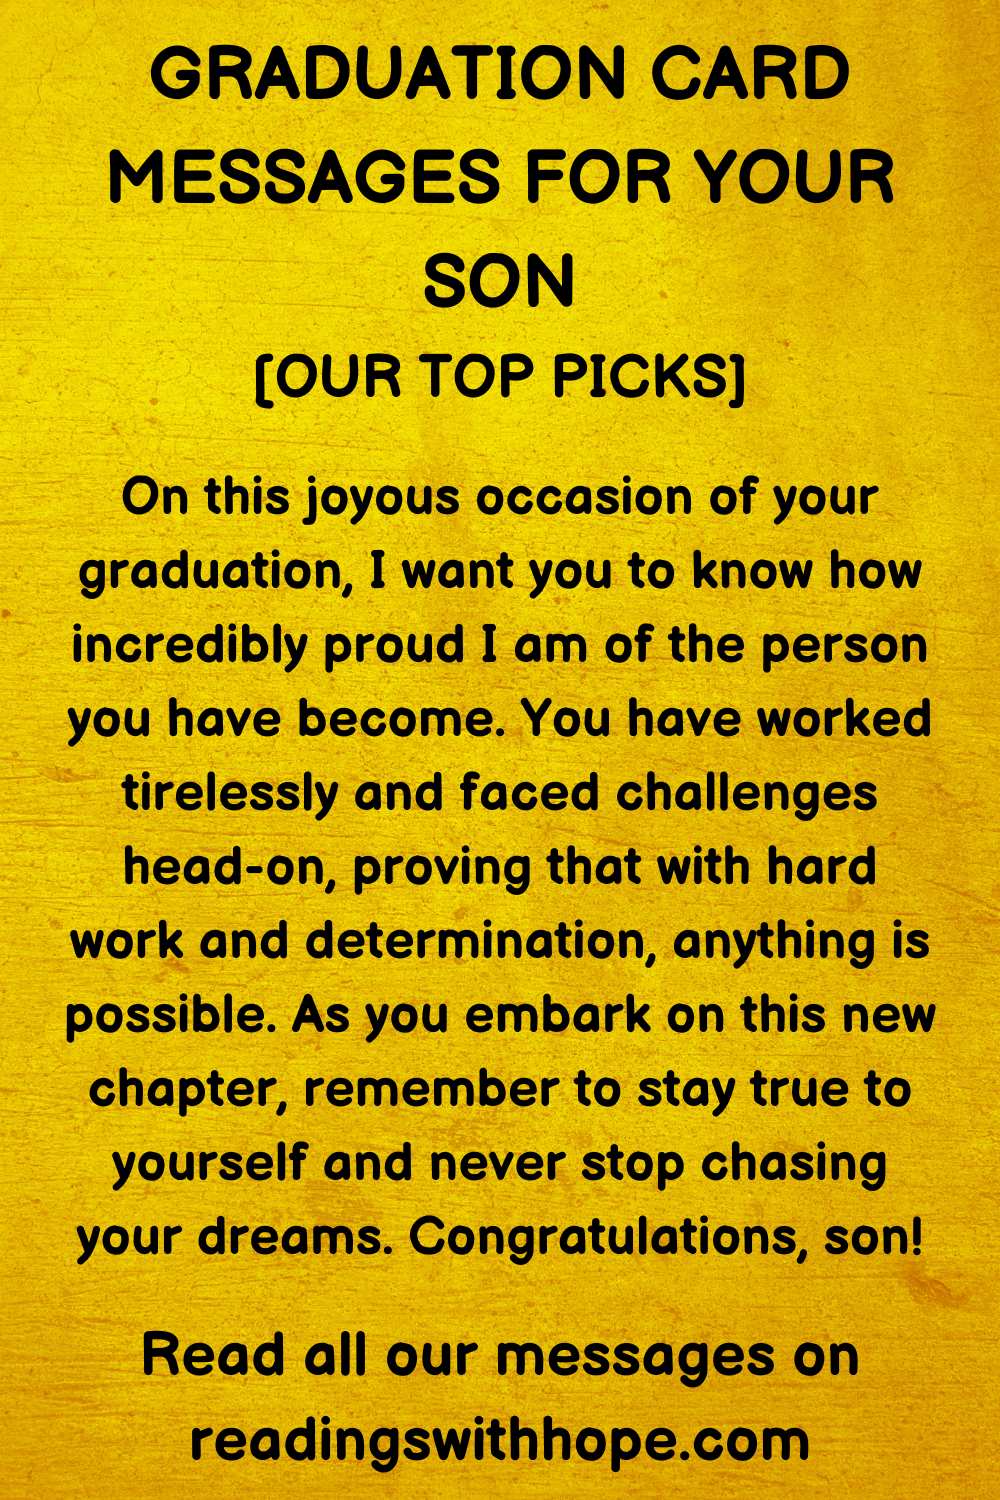 Graduation Card Messages for Son 1